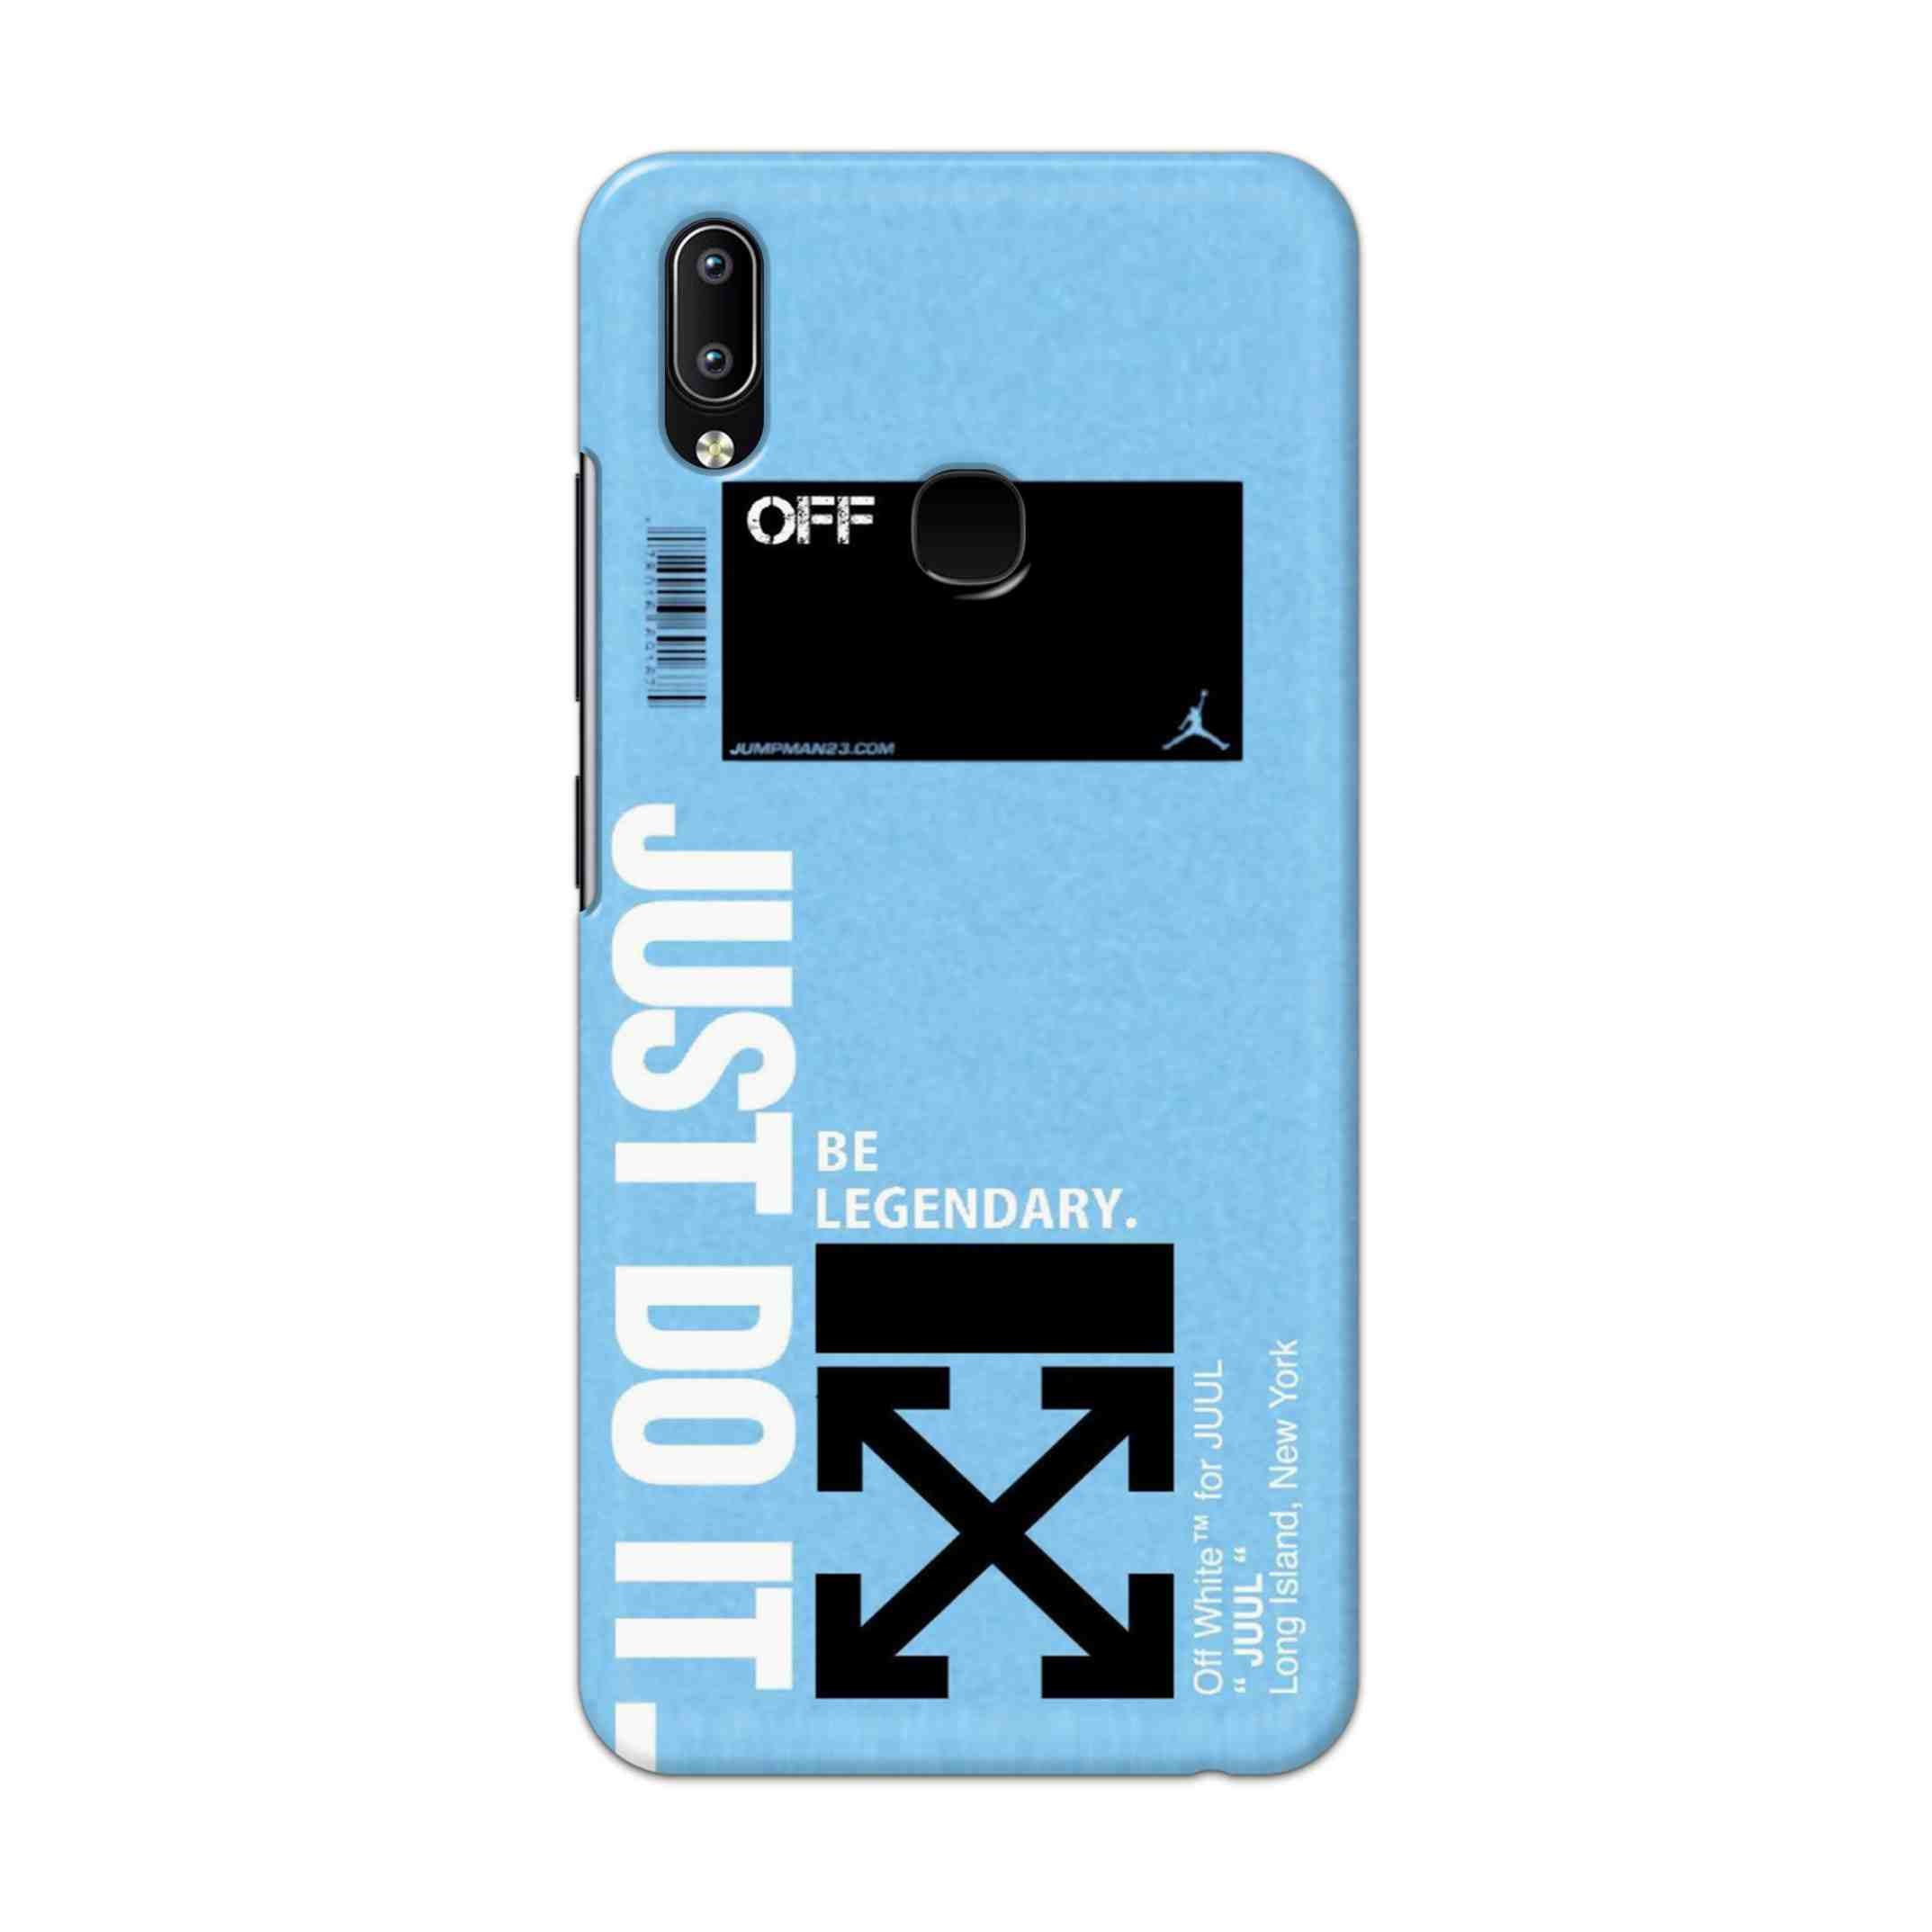 Buy Just Do It Hard Back Mobile Phone Case Cover For Vivo Y95 / Y93 / Y91 Online